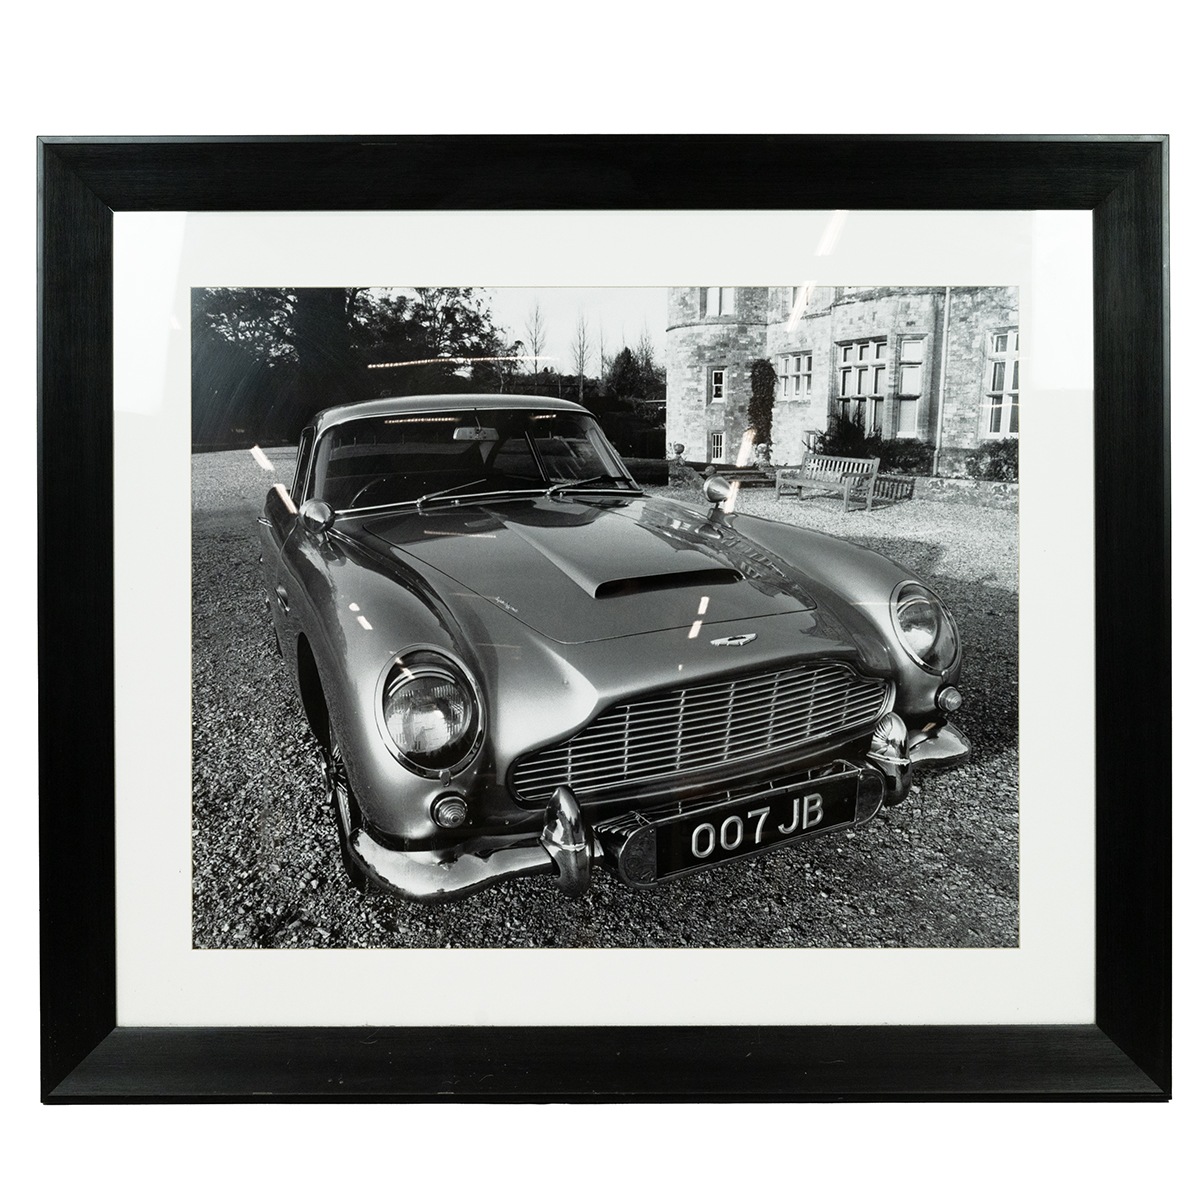 James Bond Interest. Large Framed black and white photographic print of an Aston Martin DB7 with ...